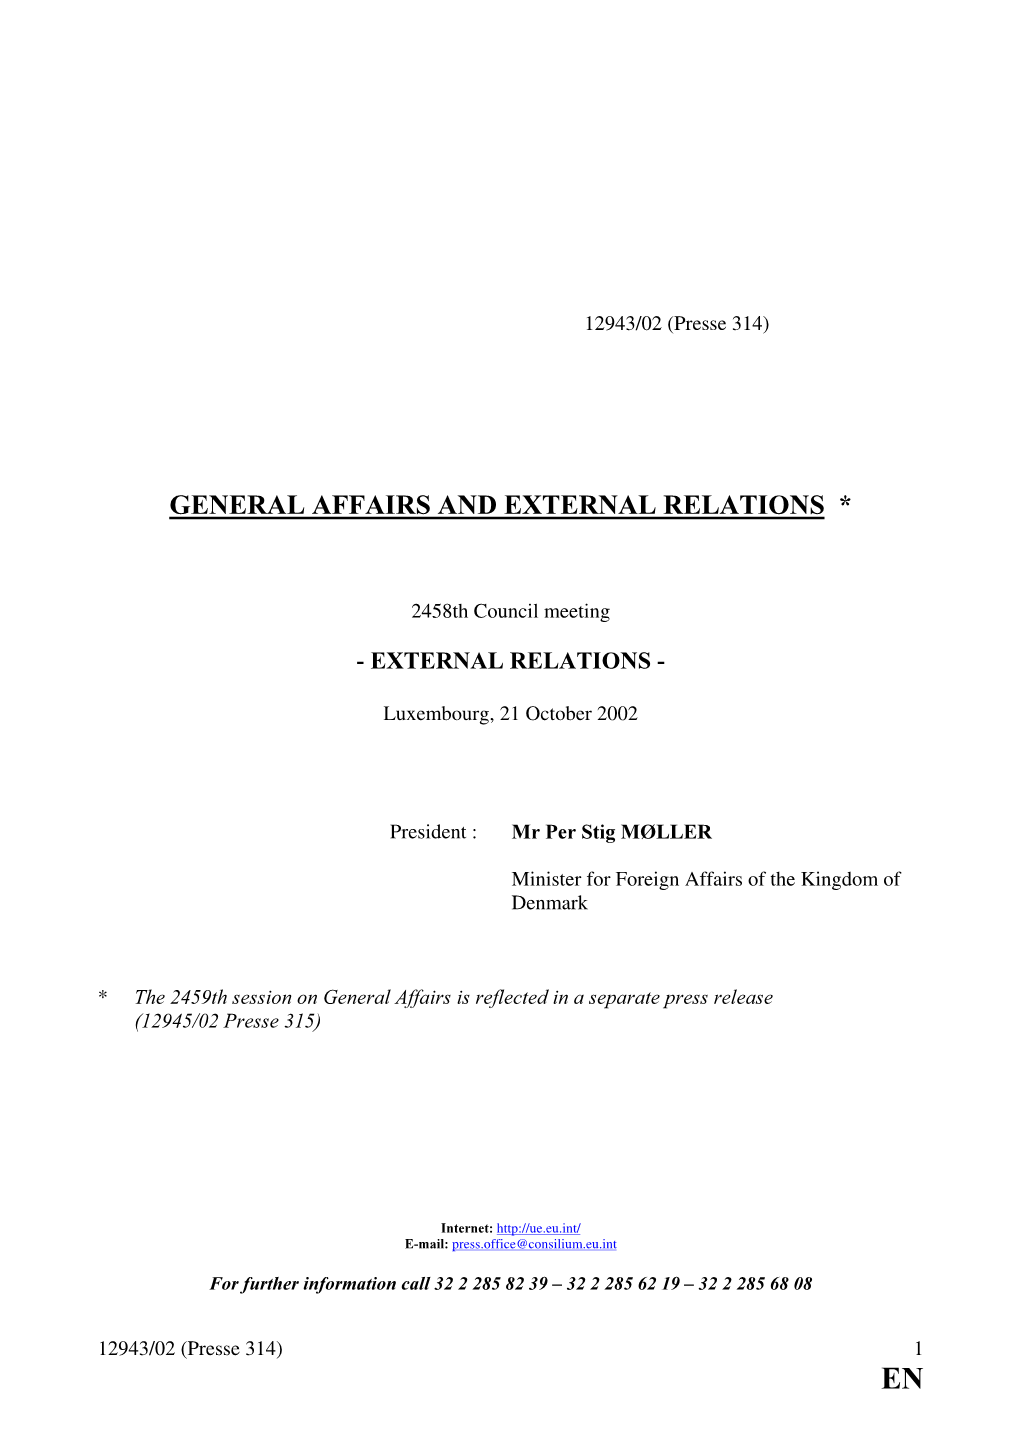 General Affairs and External Relations